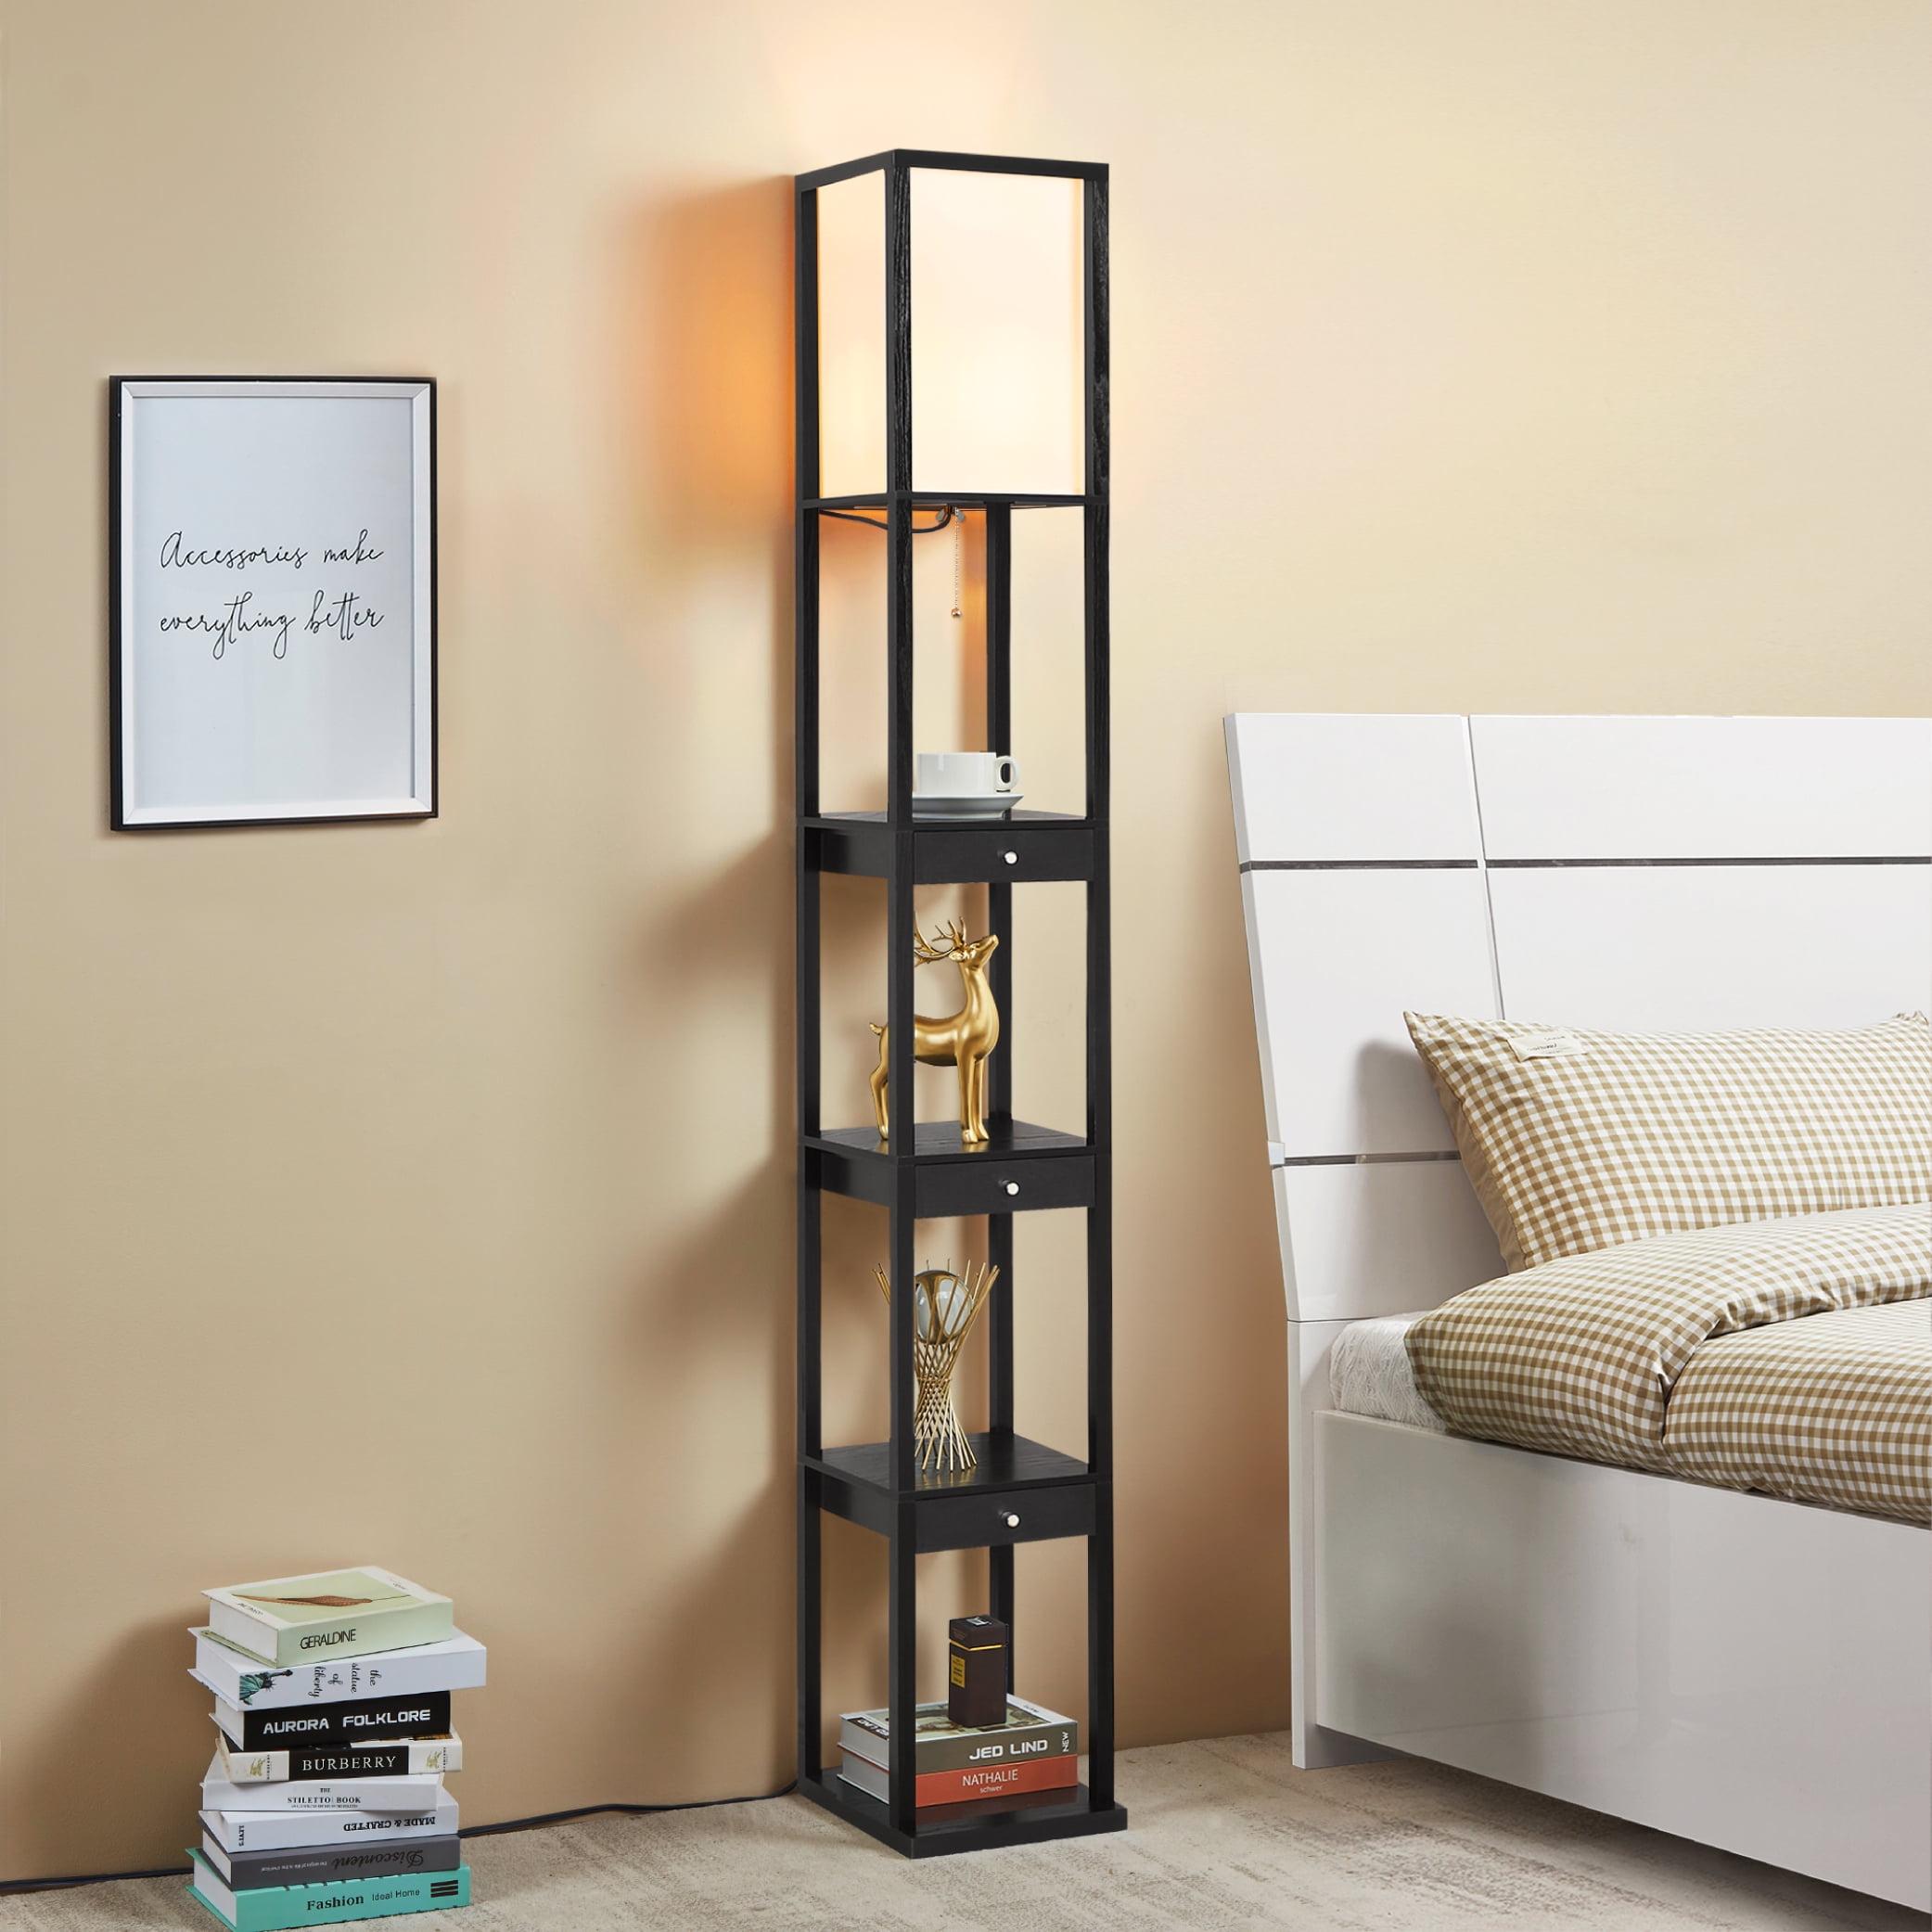 Aaron 72" Black Rustic LED Floor Lamp with Shelves and Drawers